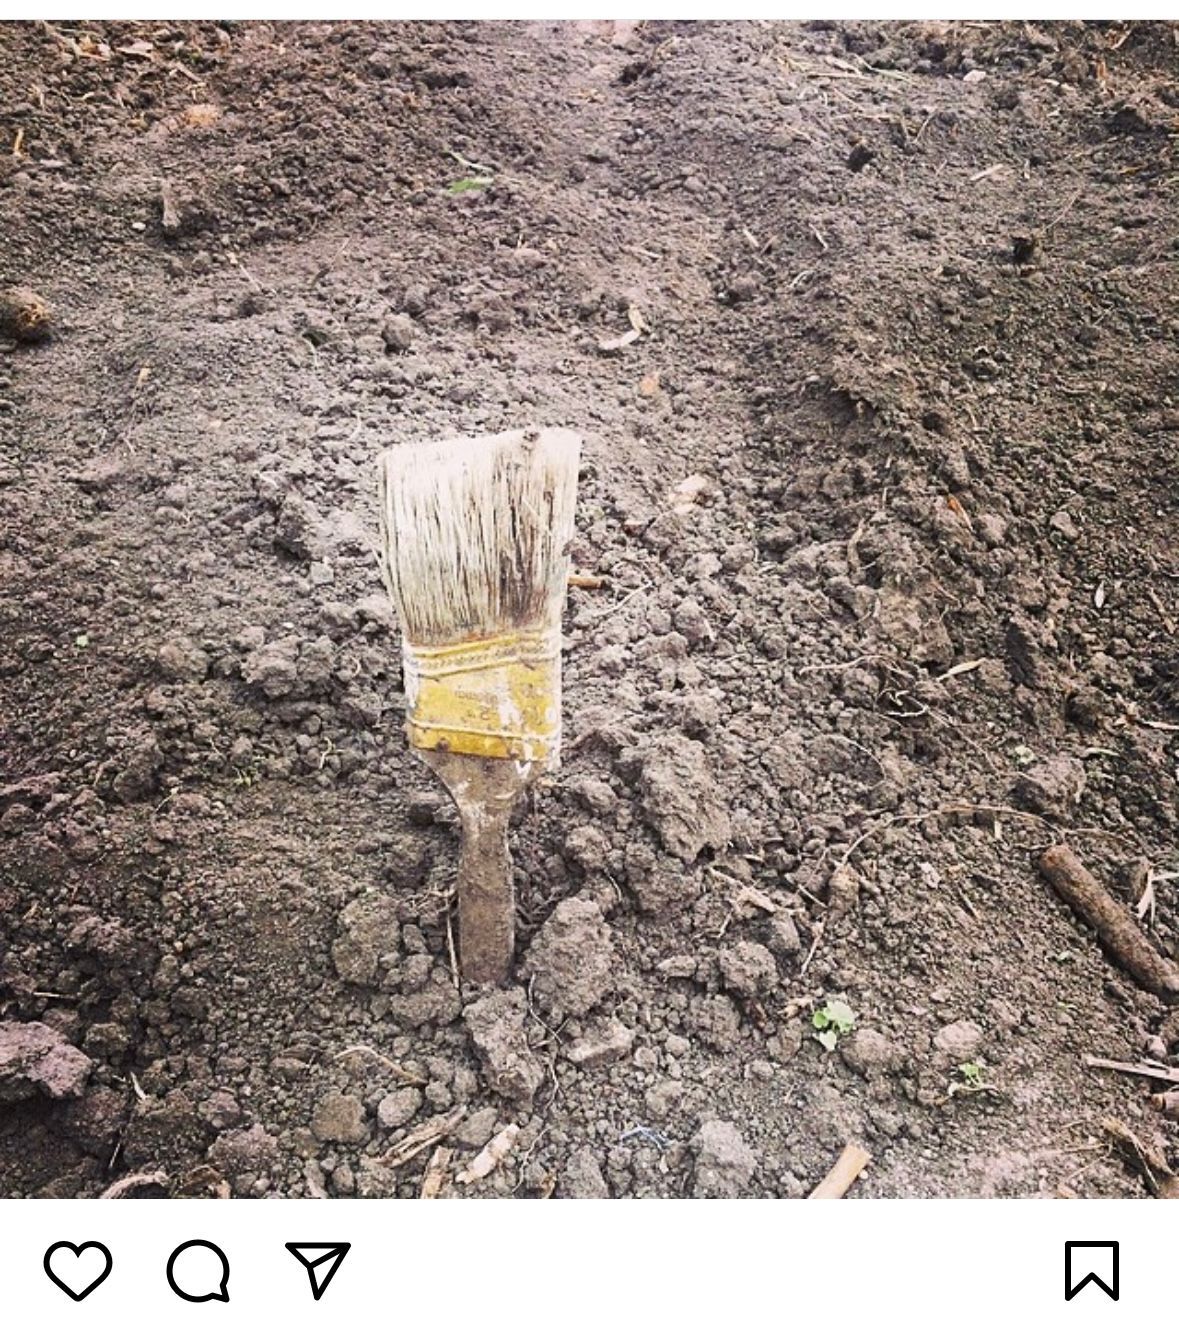 Paint Brush in the farm dirt. Instagram picture and share